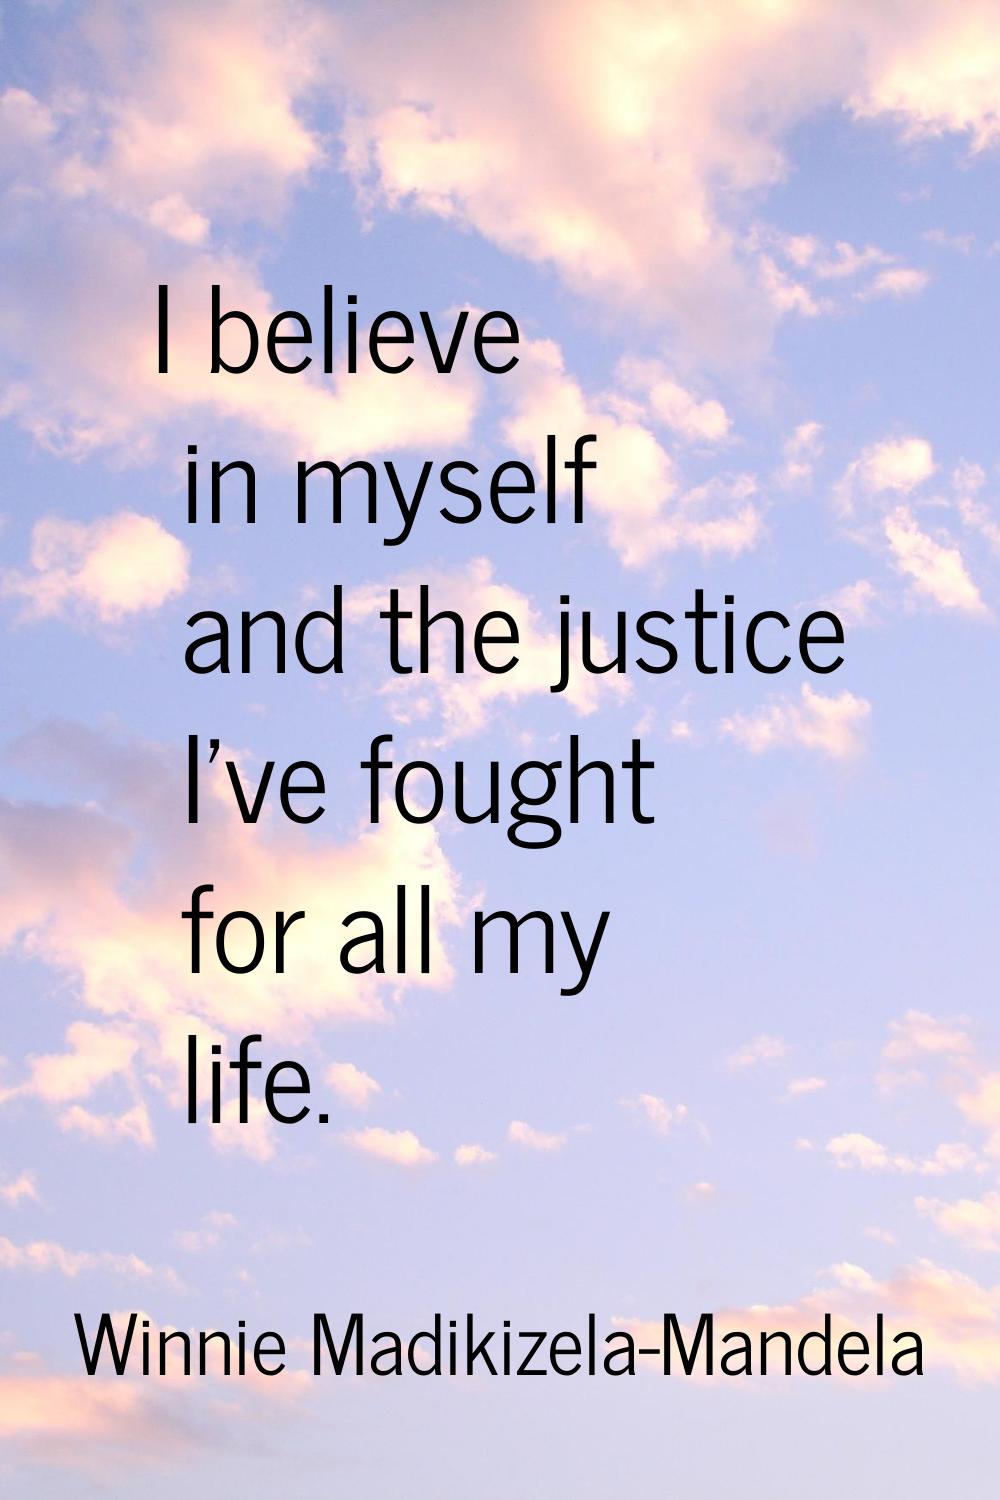 I believe in myself and the justice I've fought for all my life.